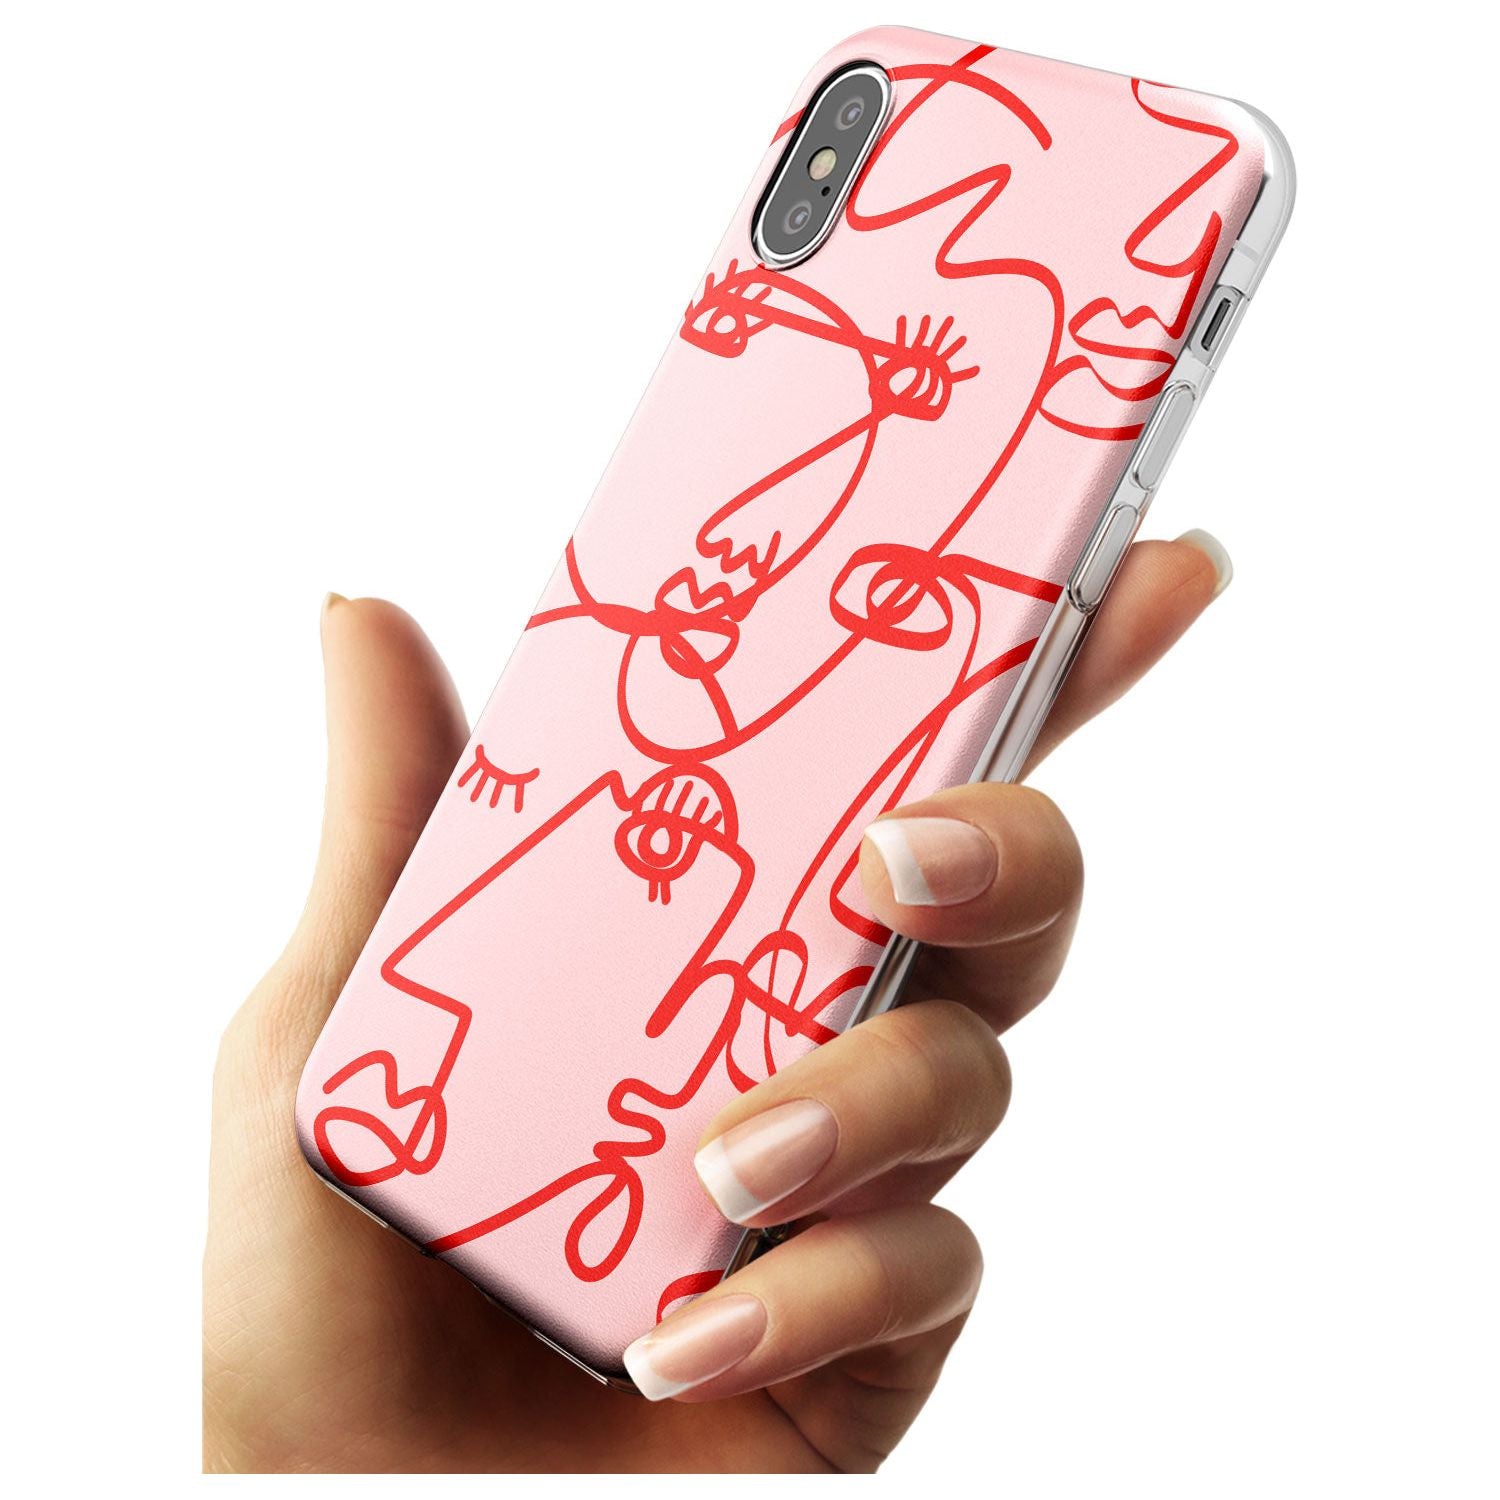 Continuous Line Faces: Red on Pink Black Impact Phone Case for iPhone X XS Max XR